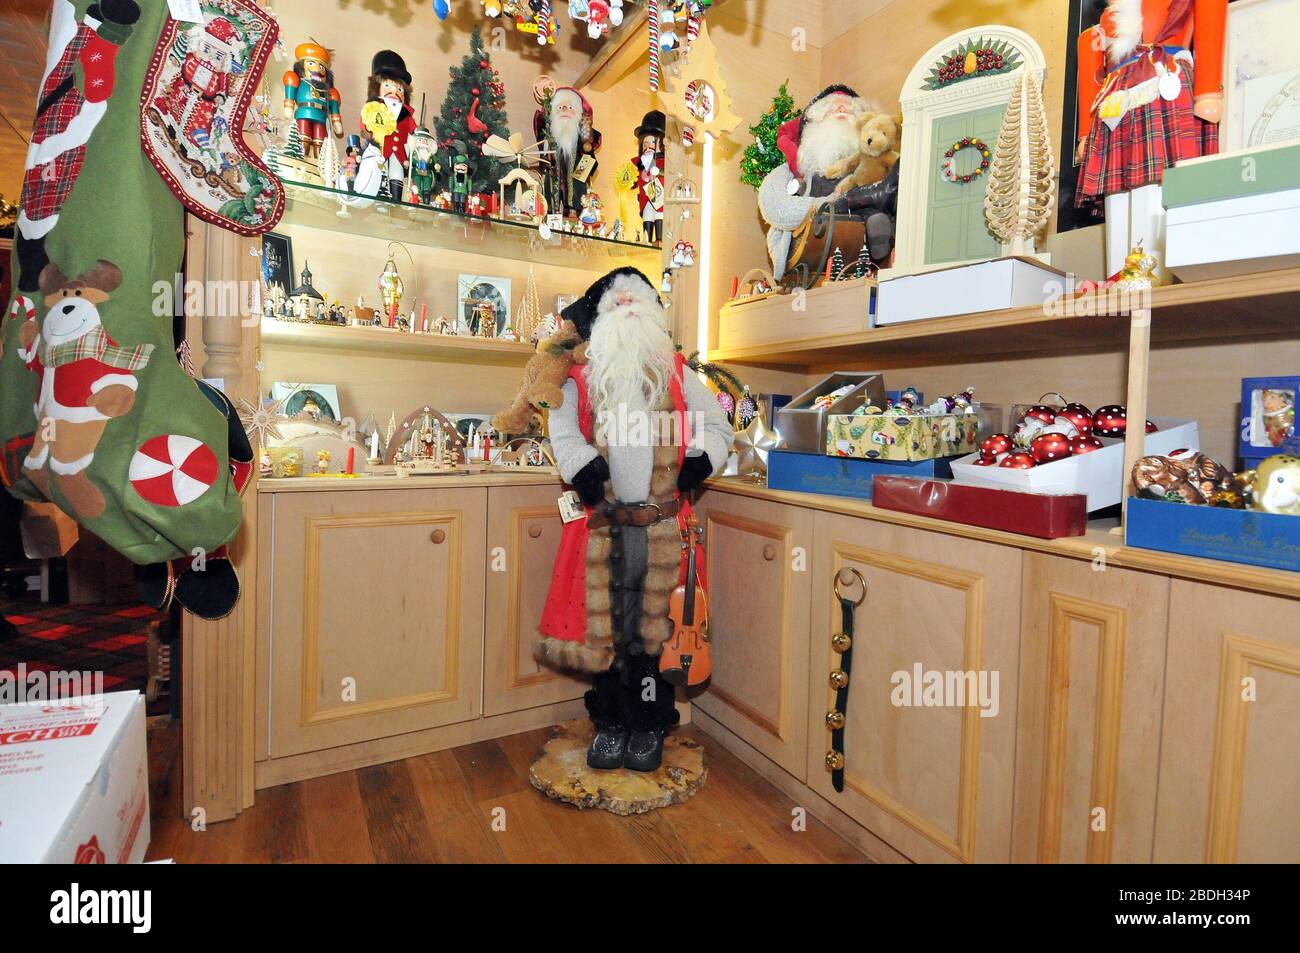 Middleburg, VA - December 12, 2008 -- Interior of The Christmas Sleigh; 5A East Washington, Street; Middleburg, Virginia 20118, owned by Linda Tripp Rausch and her husband, Dieter Rausch  on Friday, December 12, 2008.Credit: Ron Sachs / CNP (RESTRICTION: NO New York or New Jersey Newspapers or newspapers within a 75 mile radius of New York City) | usage worldwide Stock Photo